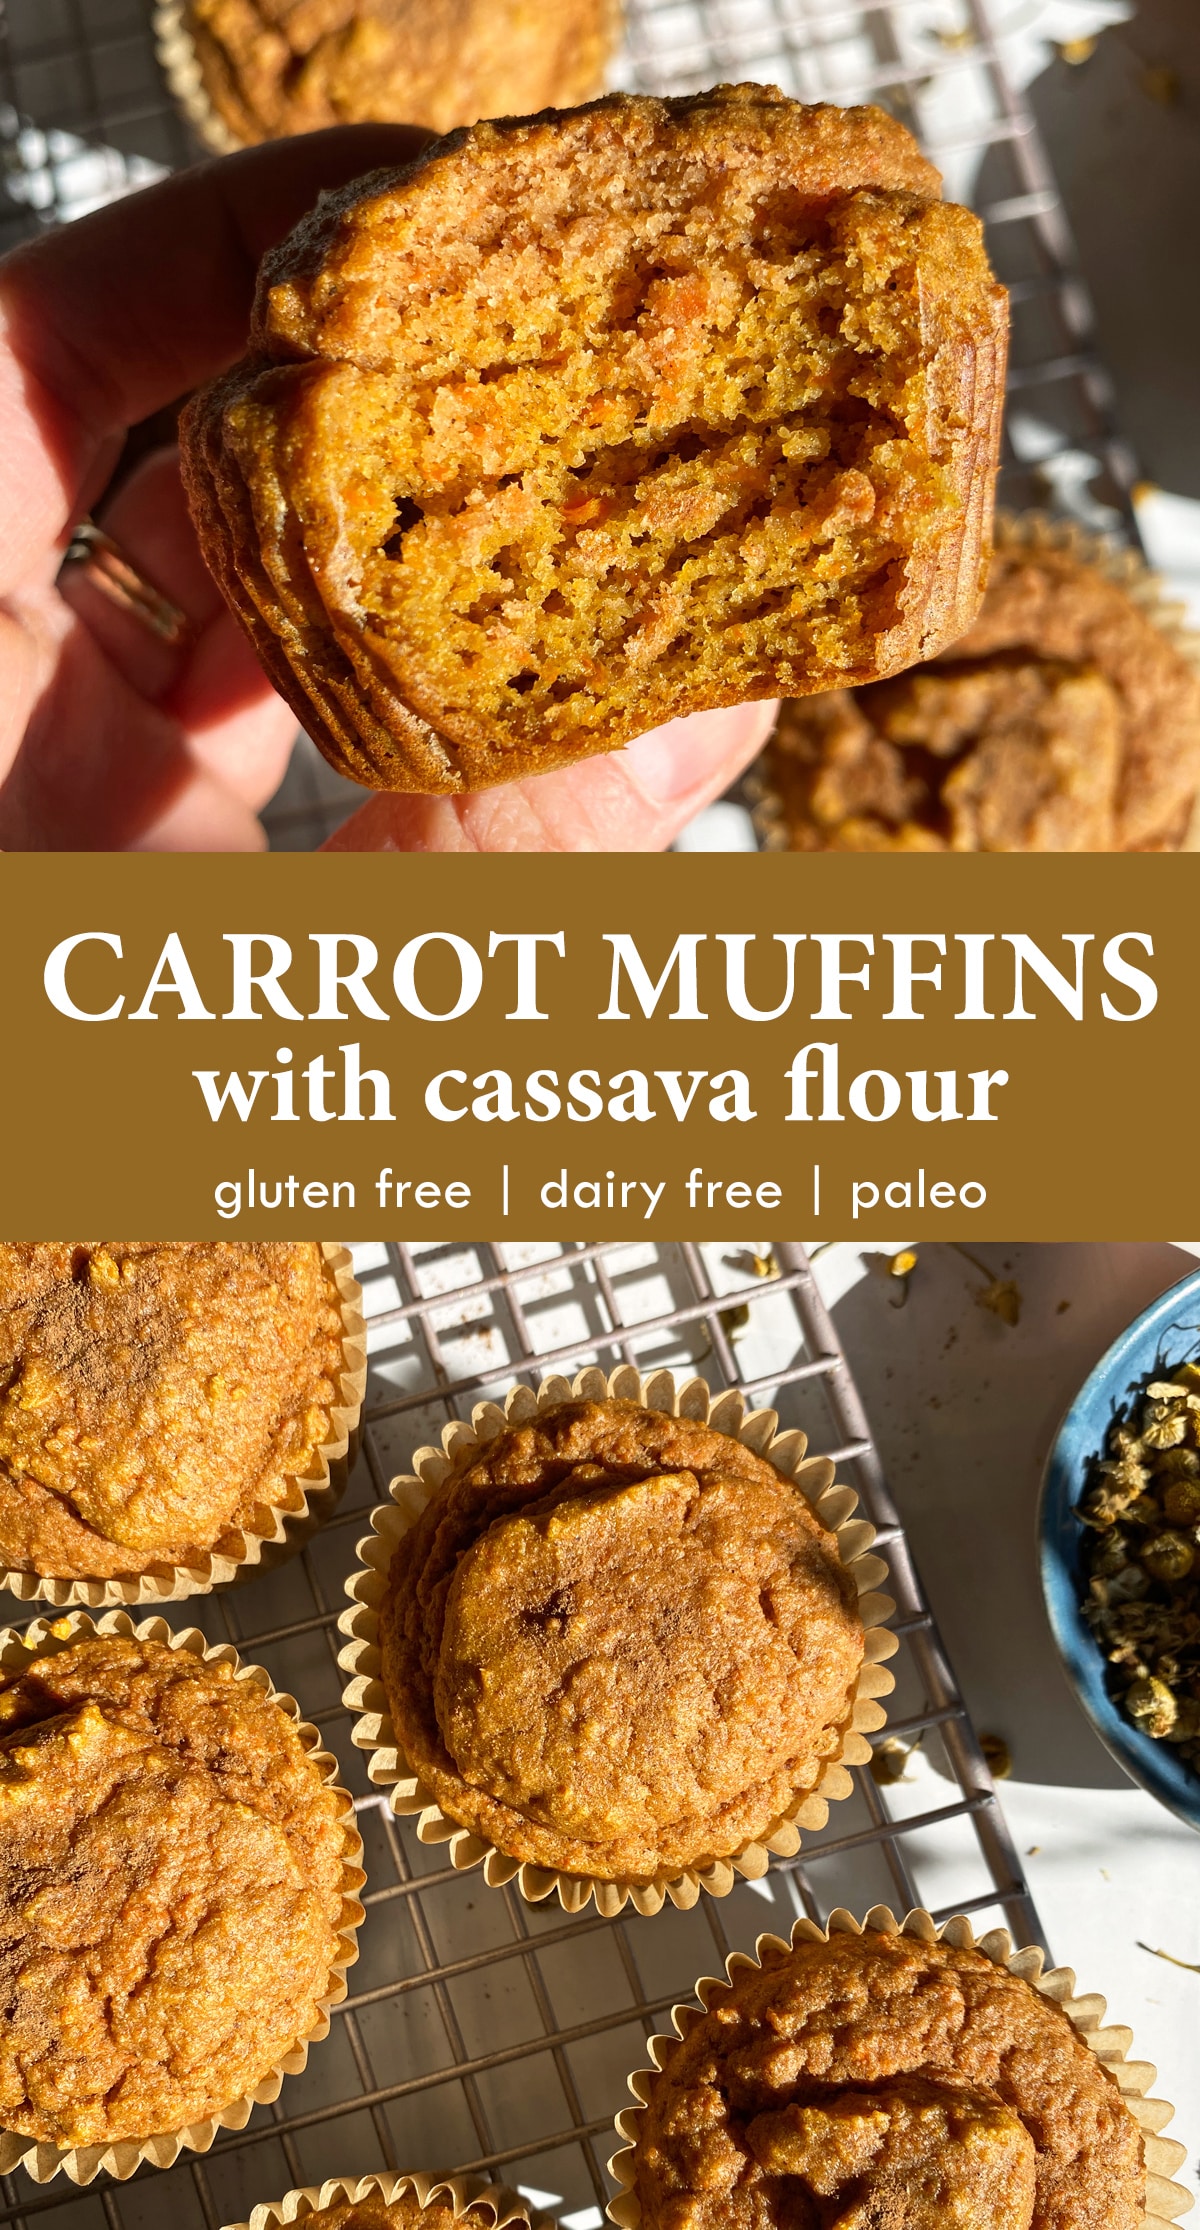 Pinterest image for carrot muffins with cassava flour.